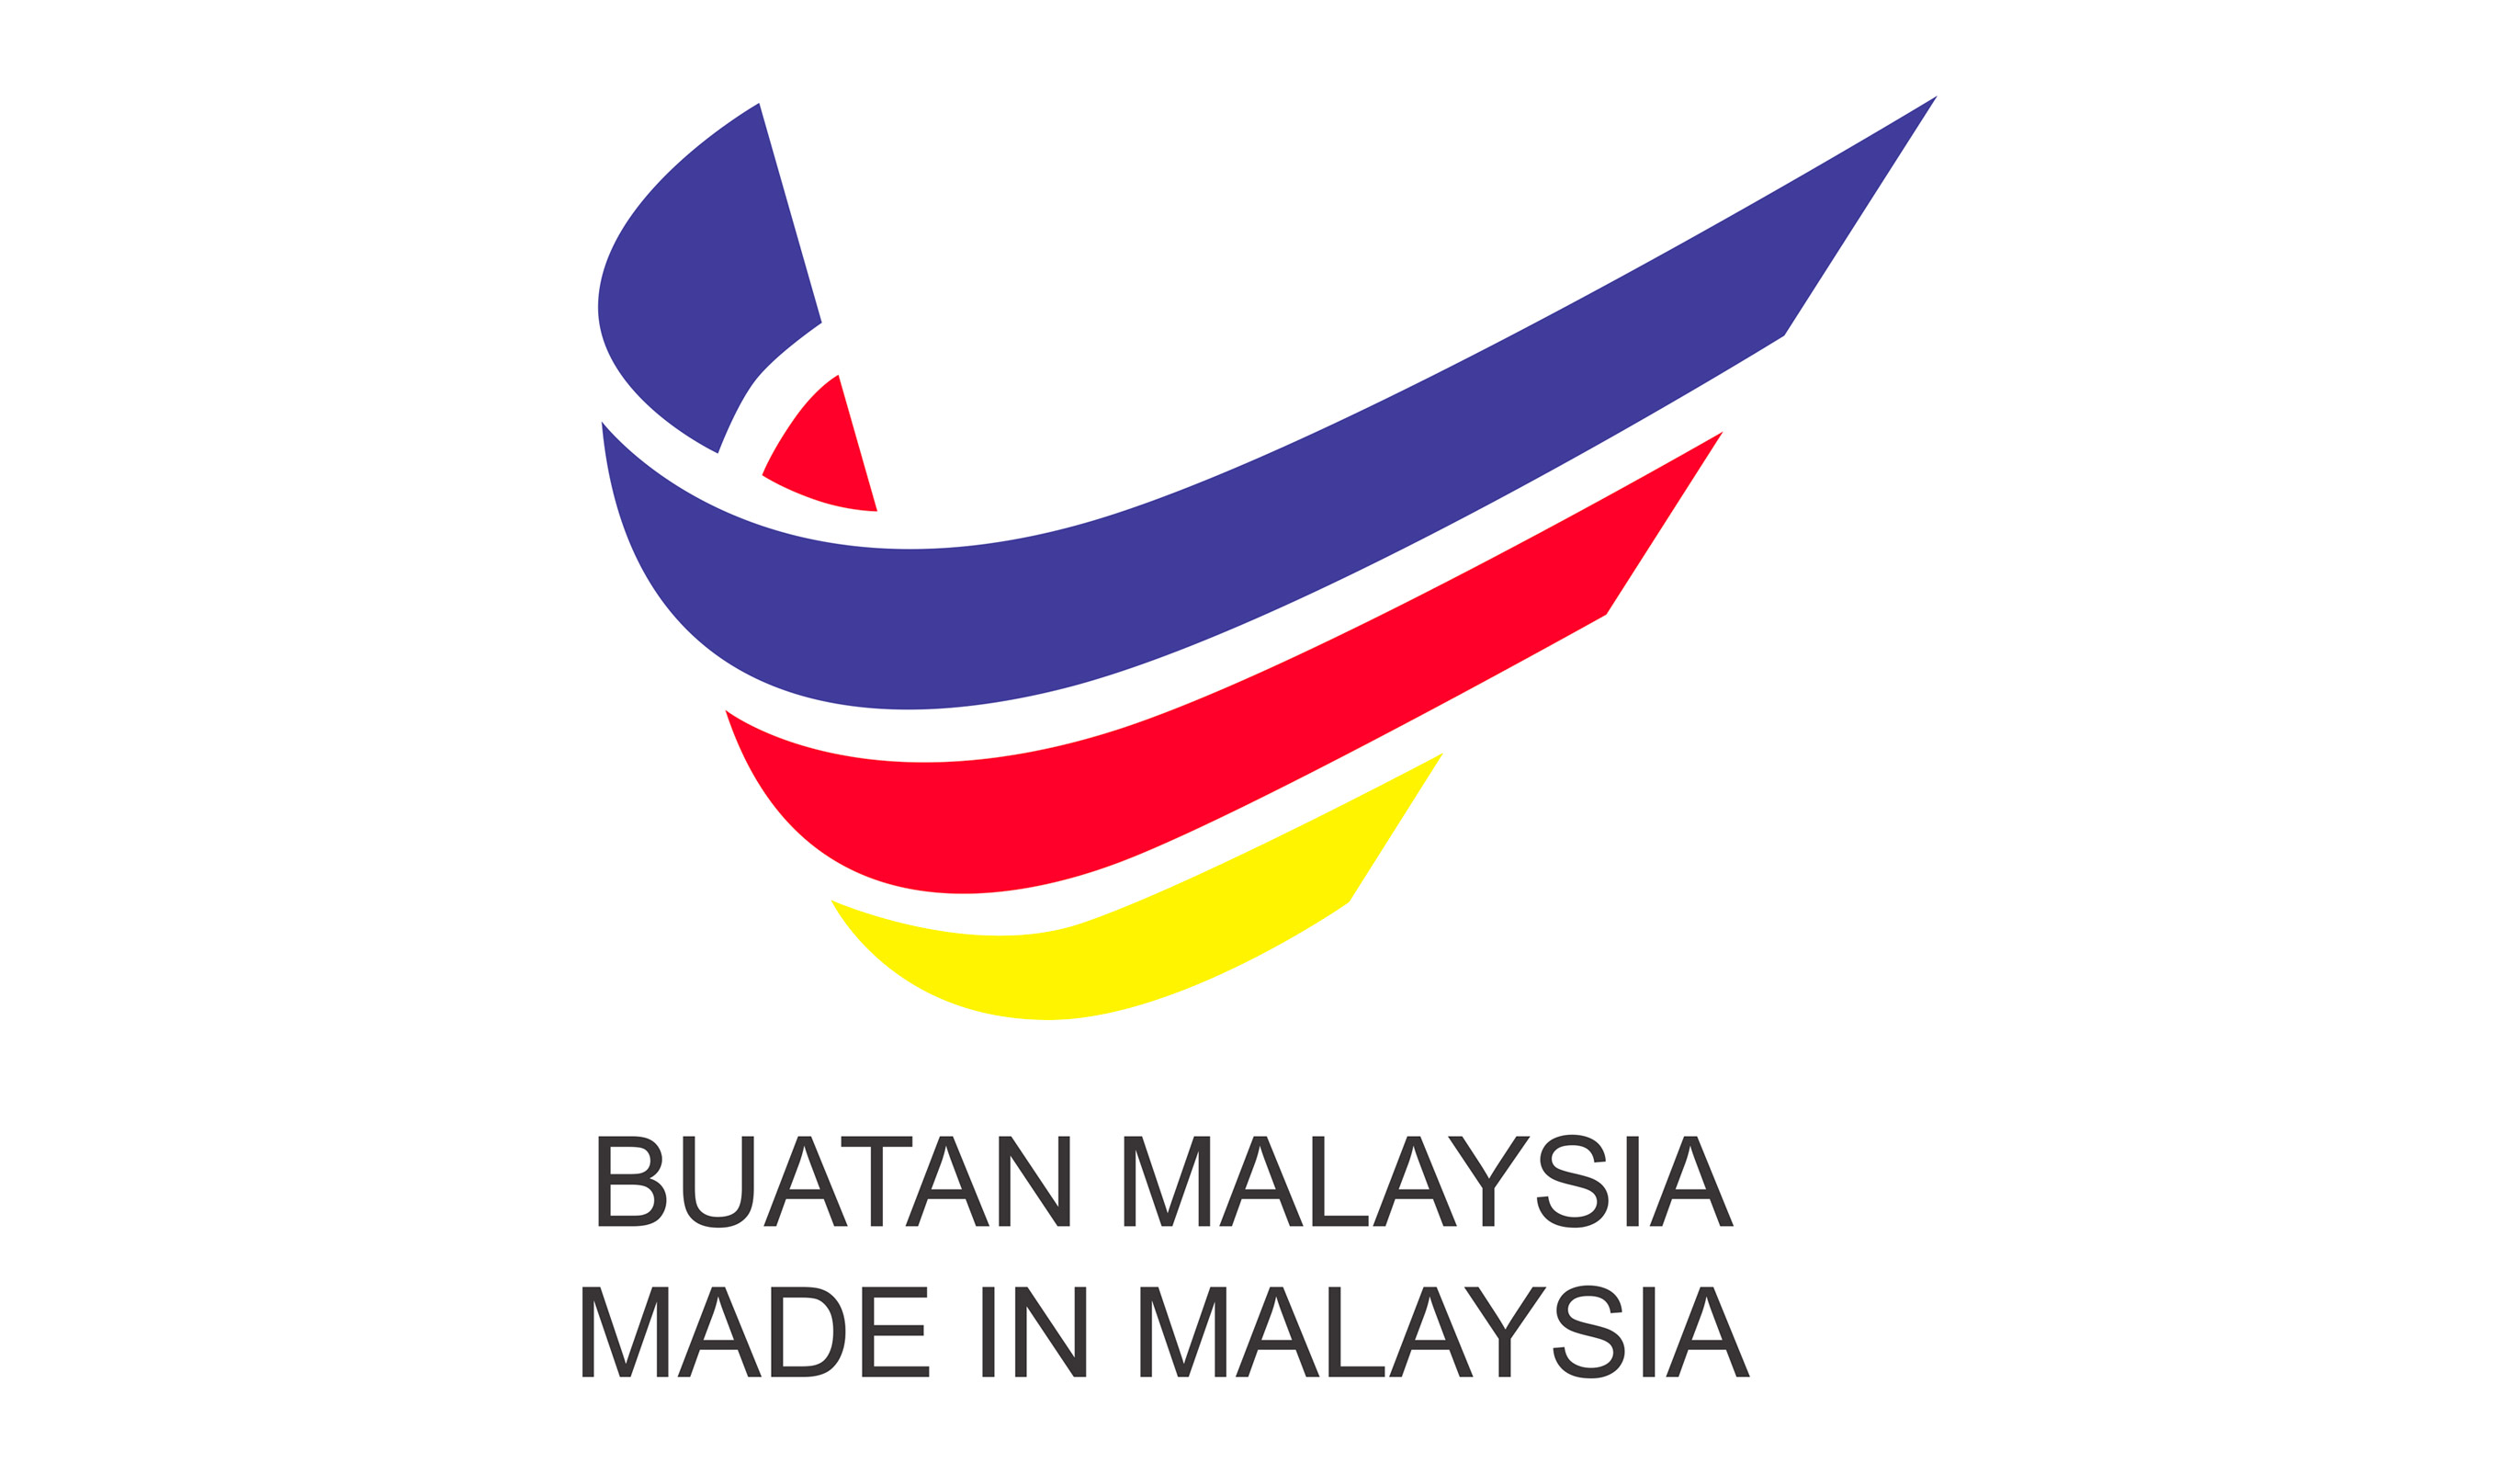 Certified "Buatan Malaysia" - Winner Foods Consolidated